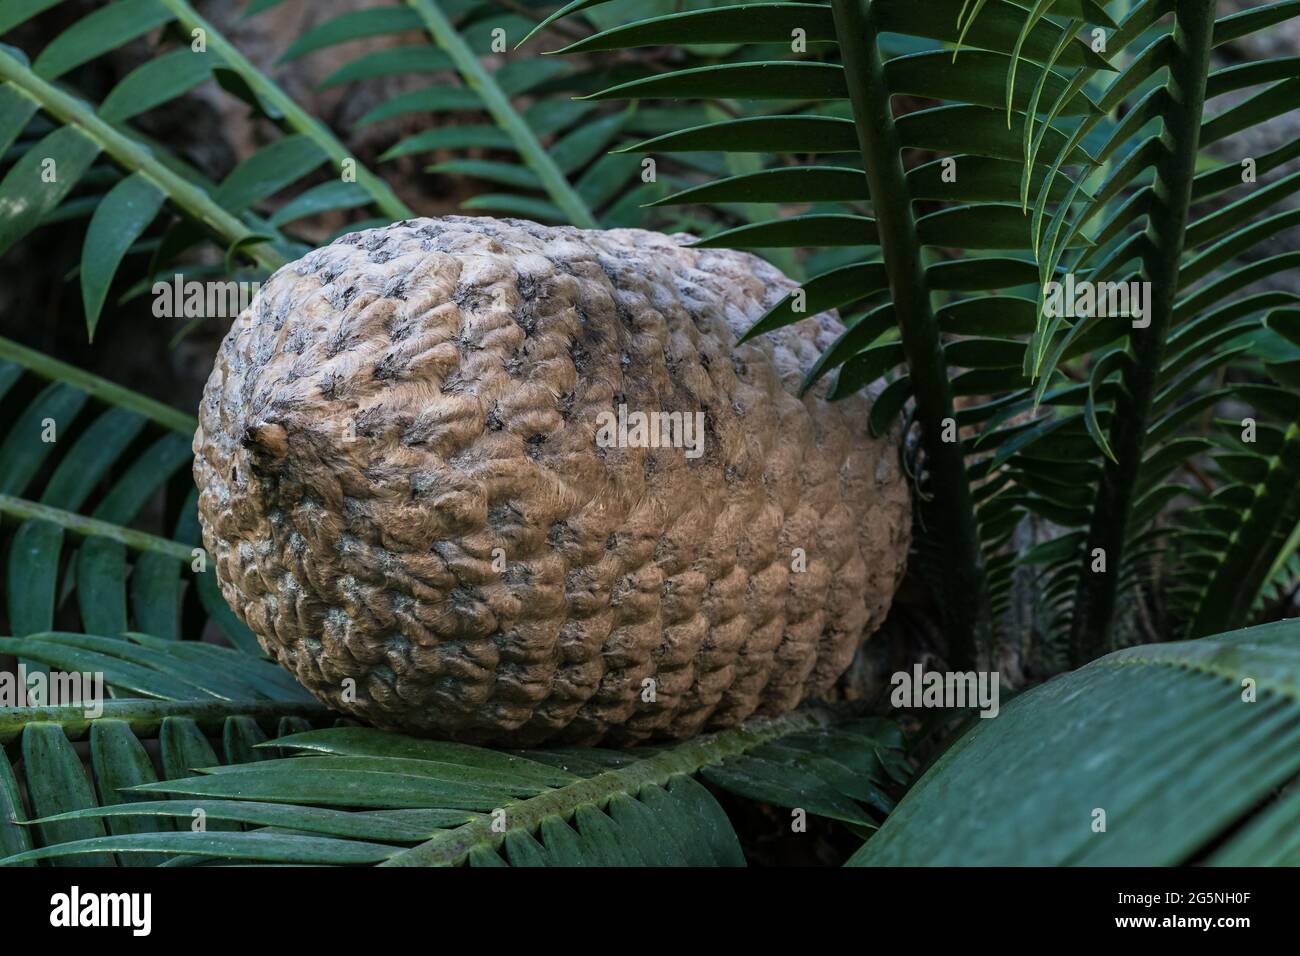 The fruit of Ceratozamia mexicana , a species of plant in the family Zamiaceae. It is found in southeastern Costa Rica, Panama and Mexico Stock Photo